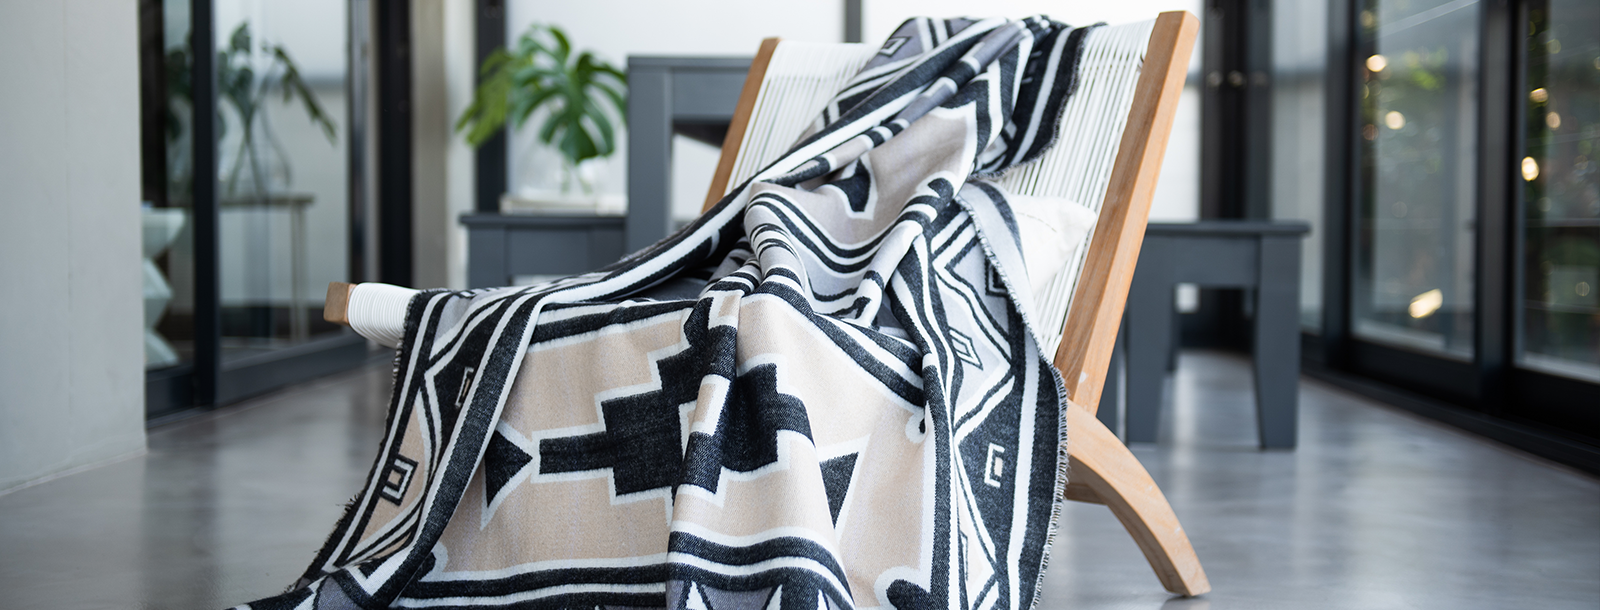 The Difference Between a Blanket and a Throw Ndebele Nation design drapped over chair in modern house